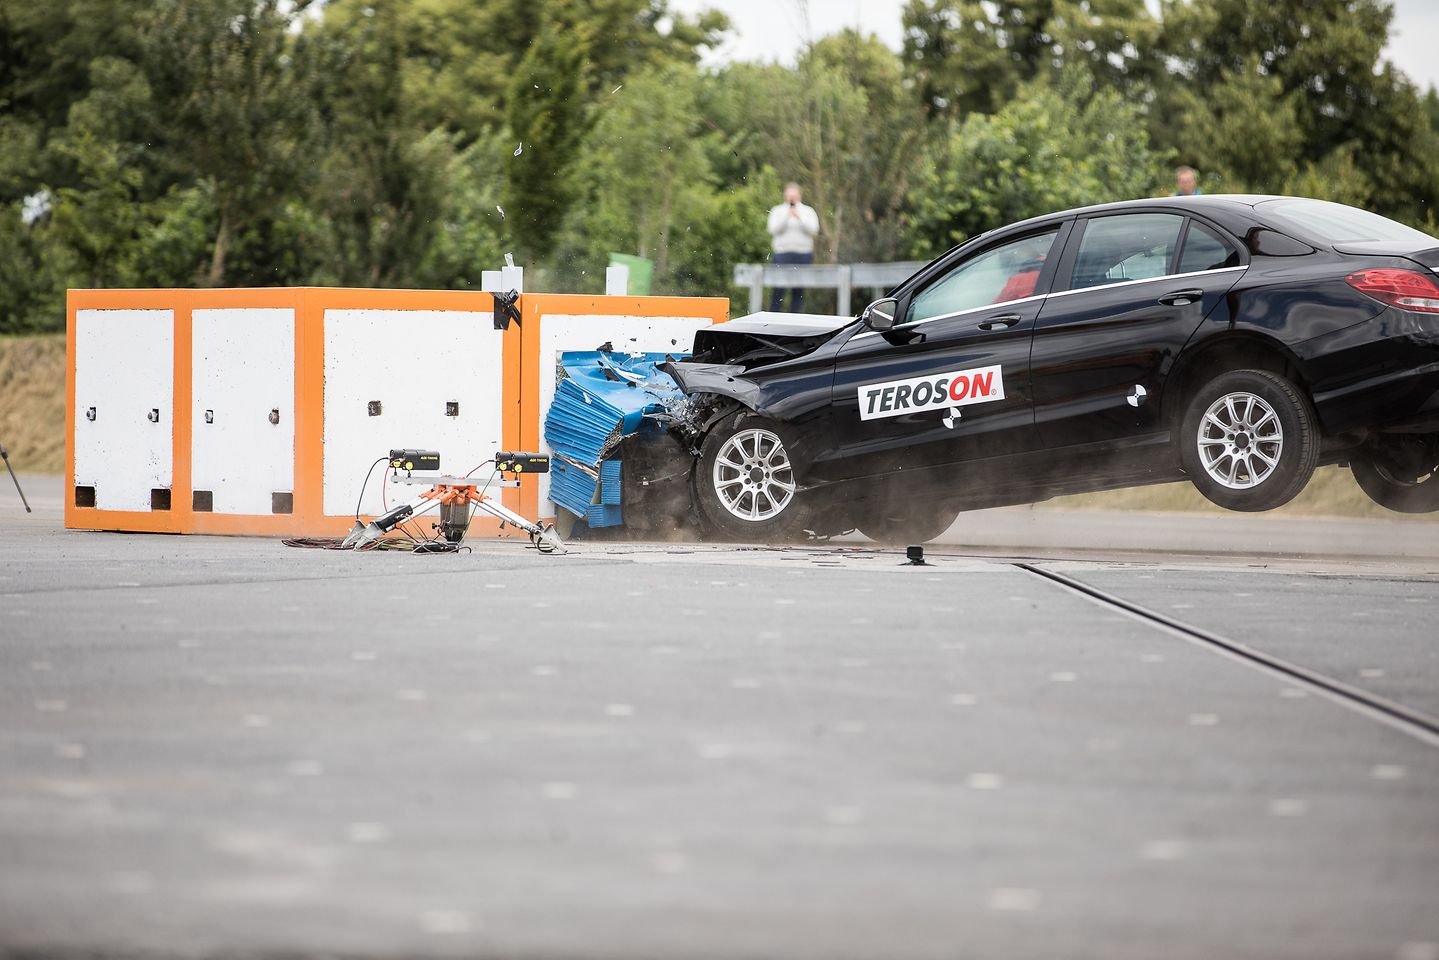 
Extraordinary live crash test: Henkel demonstrated the power and efficiency of its car repair solutions just 30 minutes after bonding the windscreen.